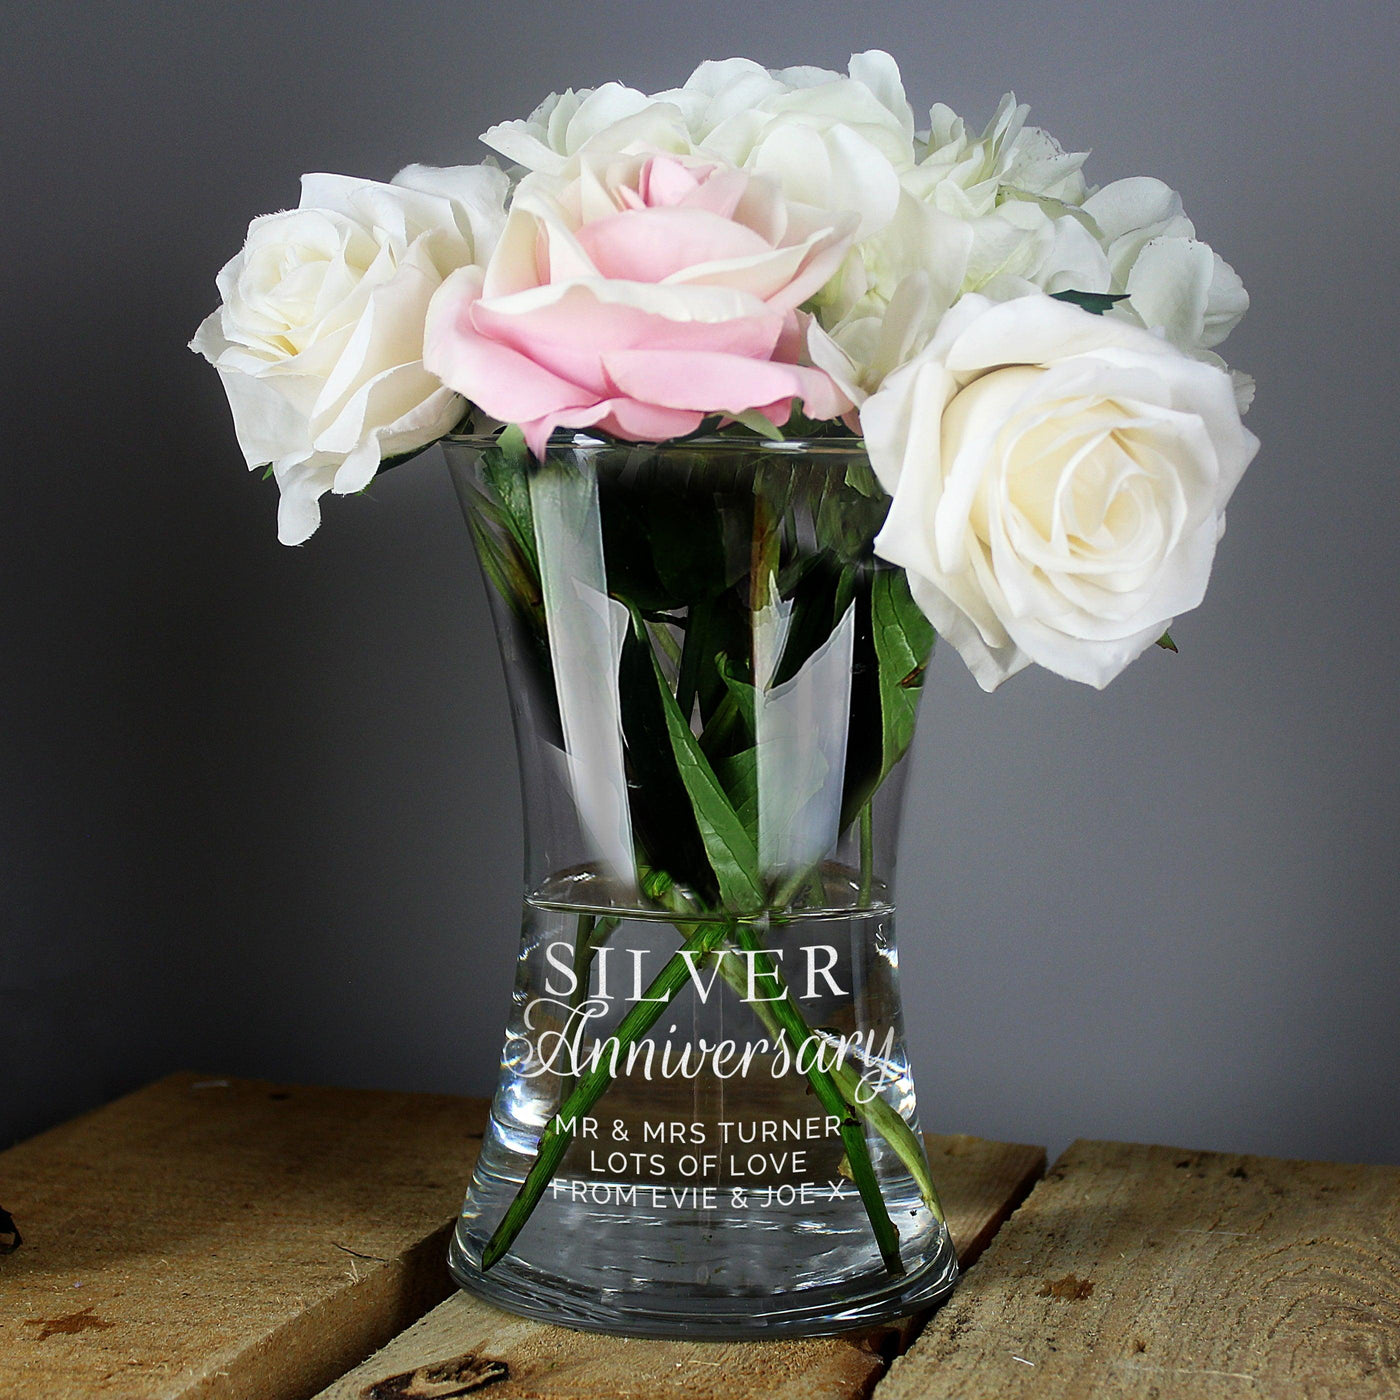 Personalised 'Silver Anniversary' Glass Vase - Shop Personalised Gifts